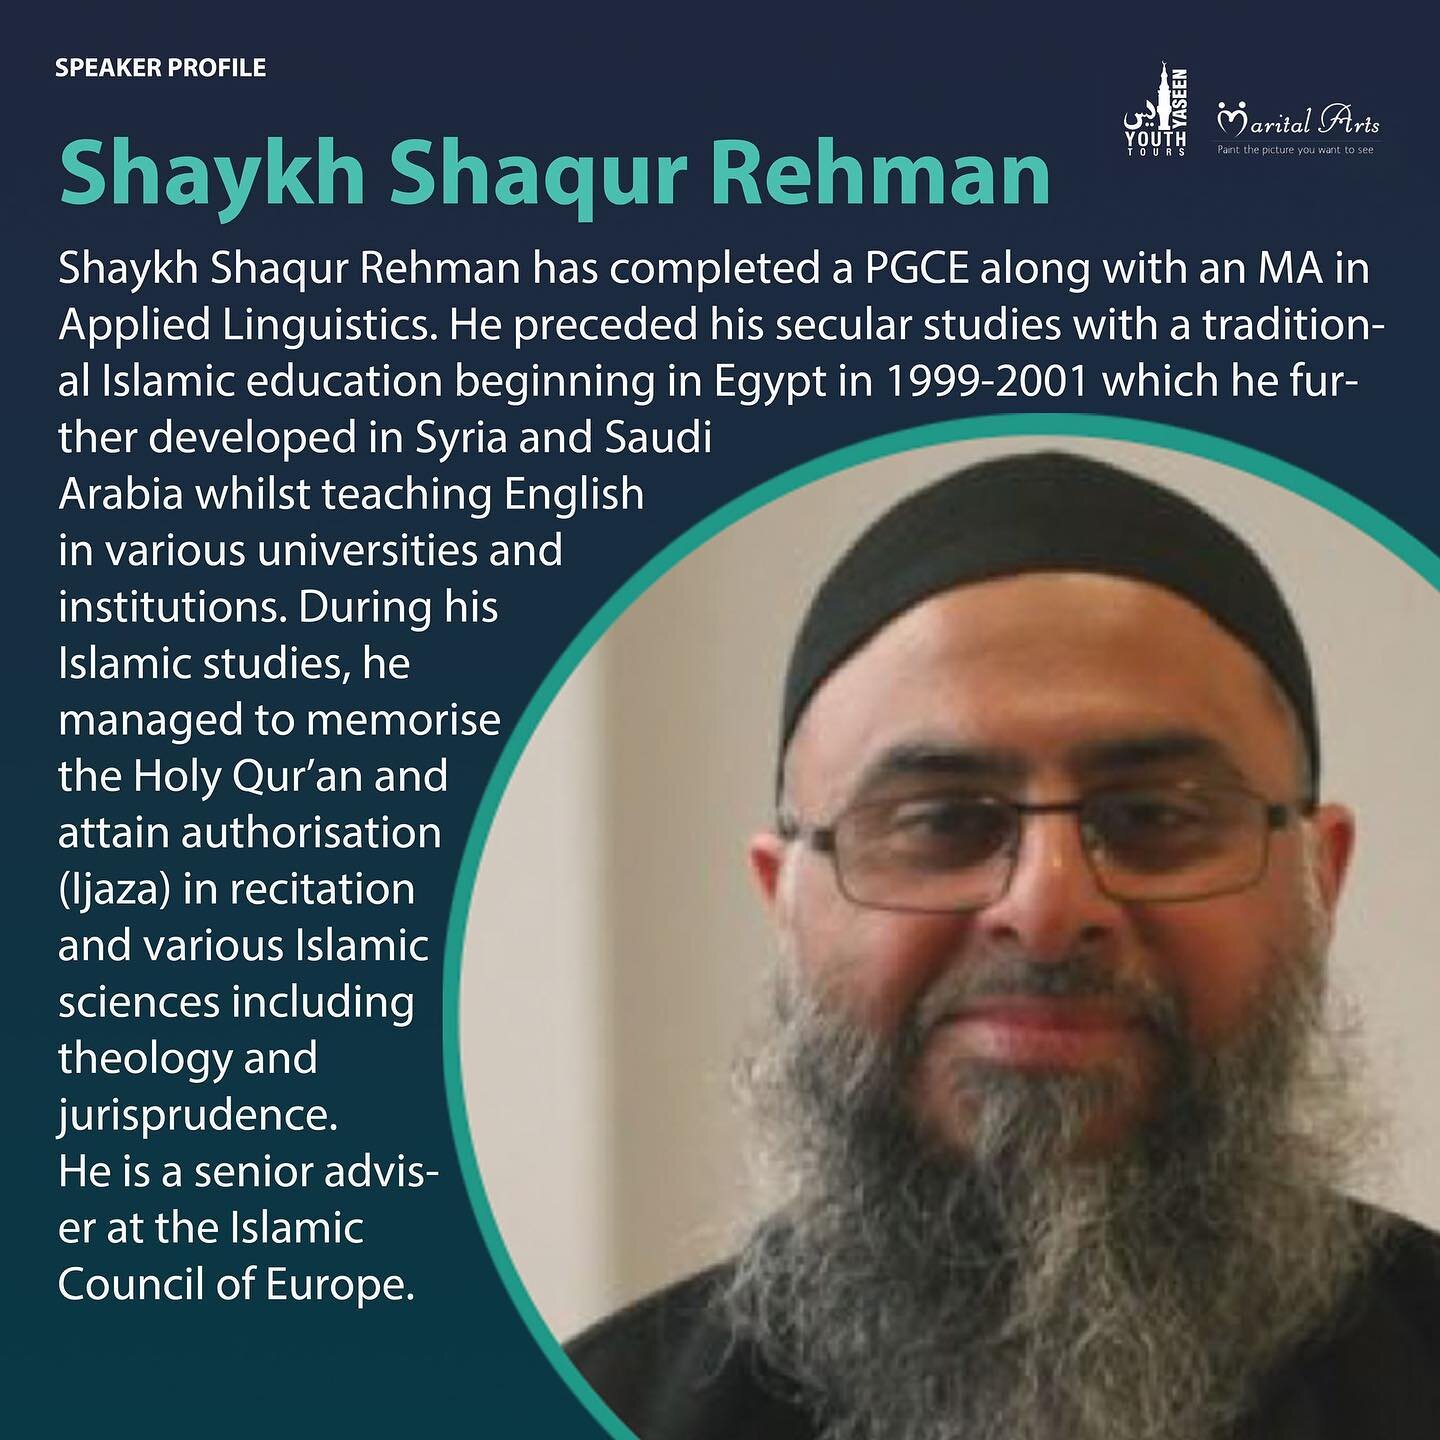 Don&rsquo;t miss our one-day event in collaboration with @yaseenyouthtours where we will be joined by one of our many speakers Shaykh Shaqur Rahman. 

Have a read above for more info about Shaykh Shaqur, who many of you will recall has delivered amaz